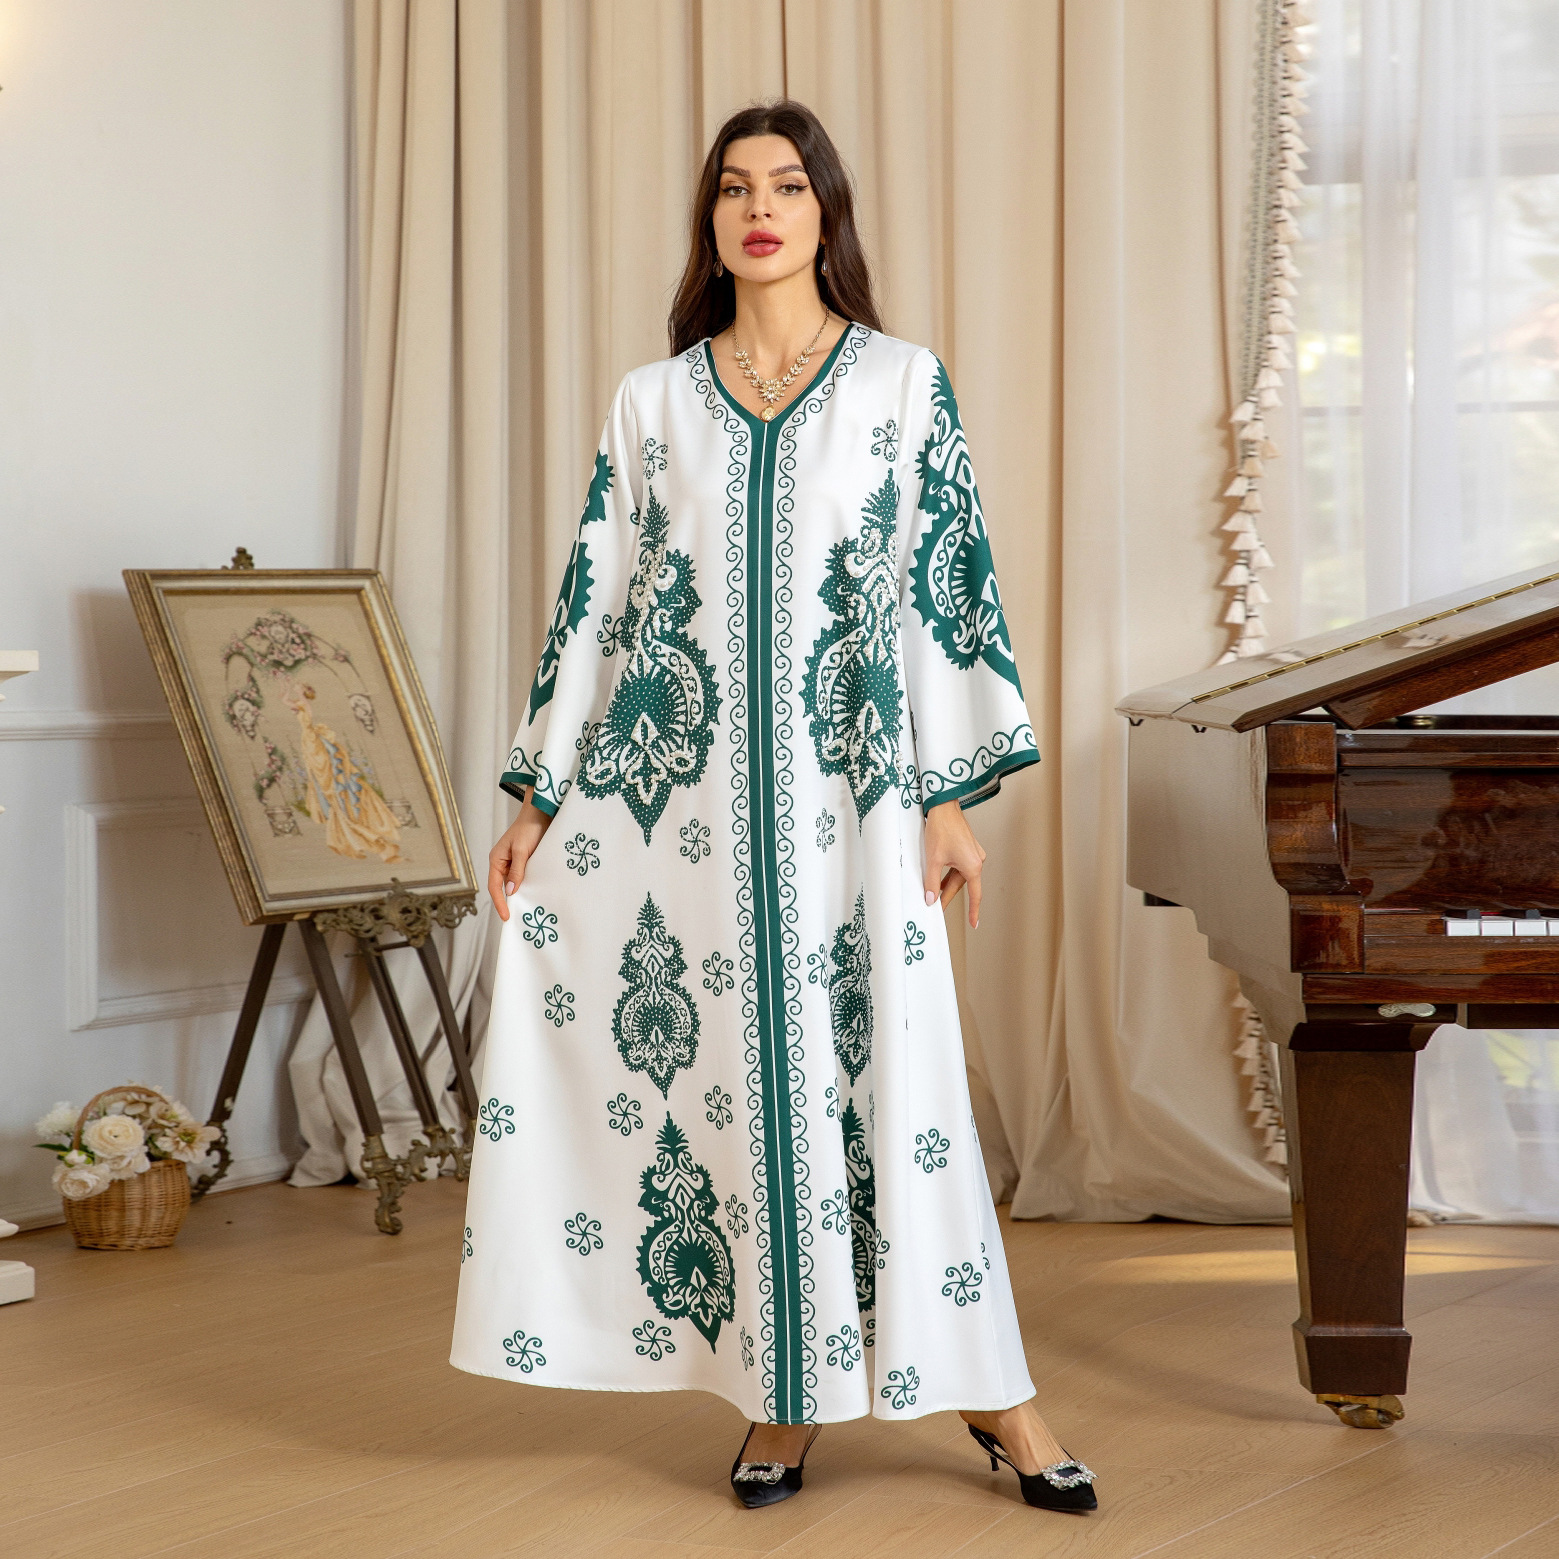 Women's Fashion Dress with Hot Diamond and Bubble Beads Printed Robe